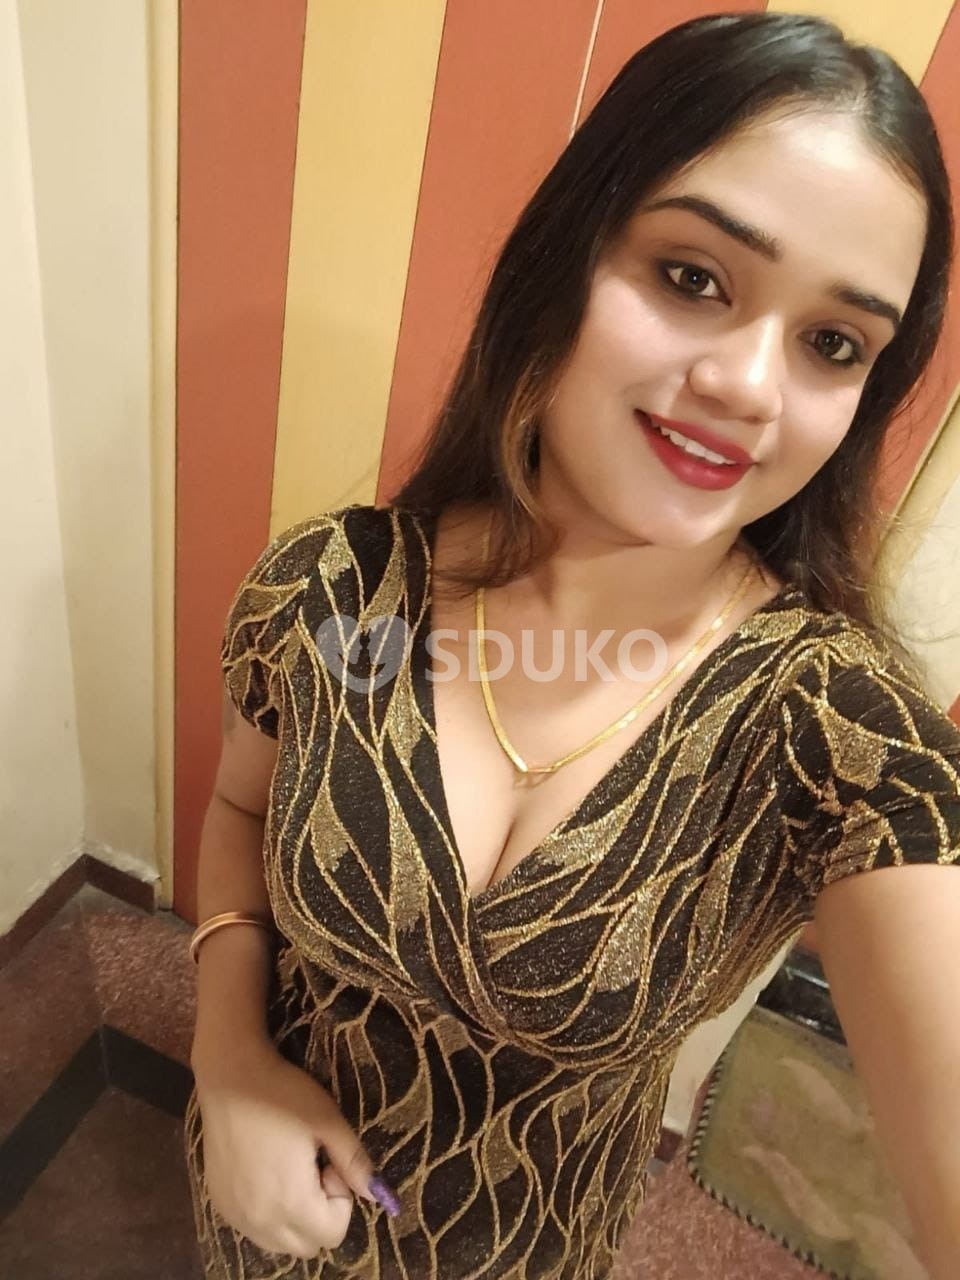 MUMBAI CENTRE INDEPENDENCE COLLEGE GIRLS HOUSEWIFE ANYTIME CALL ME